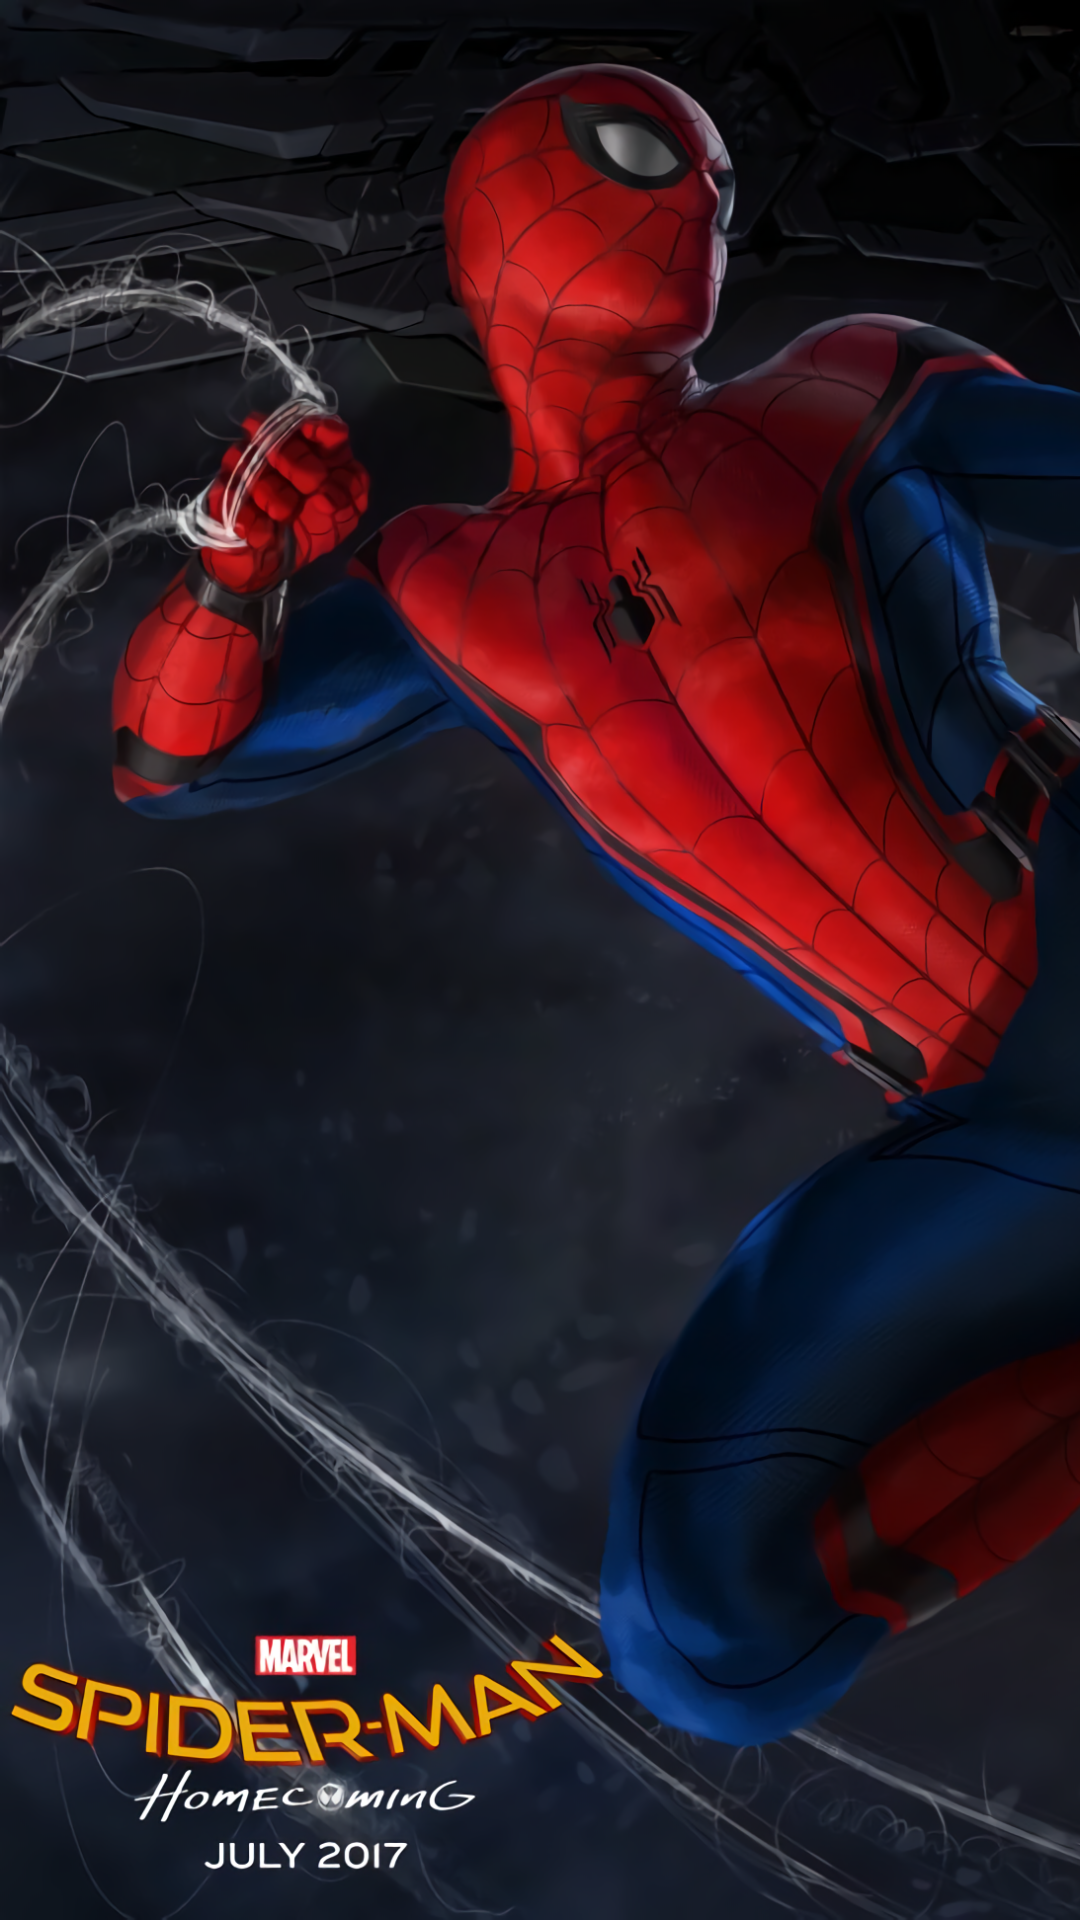 Vulture And Spiderman Homecoming Artwork Wallpapers